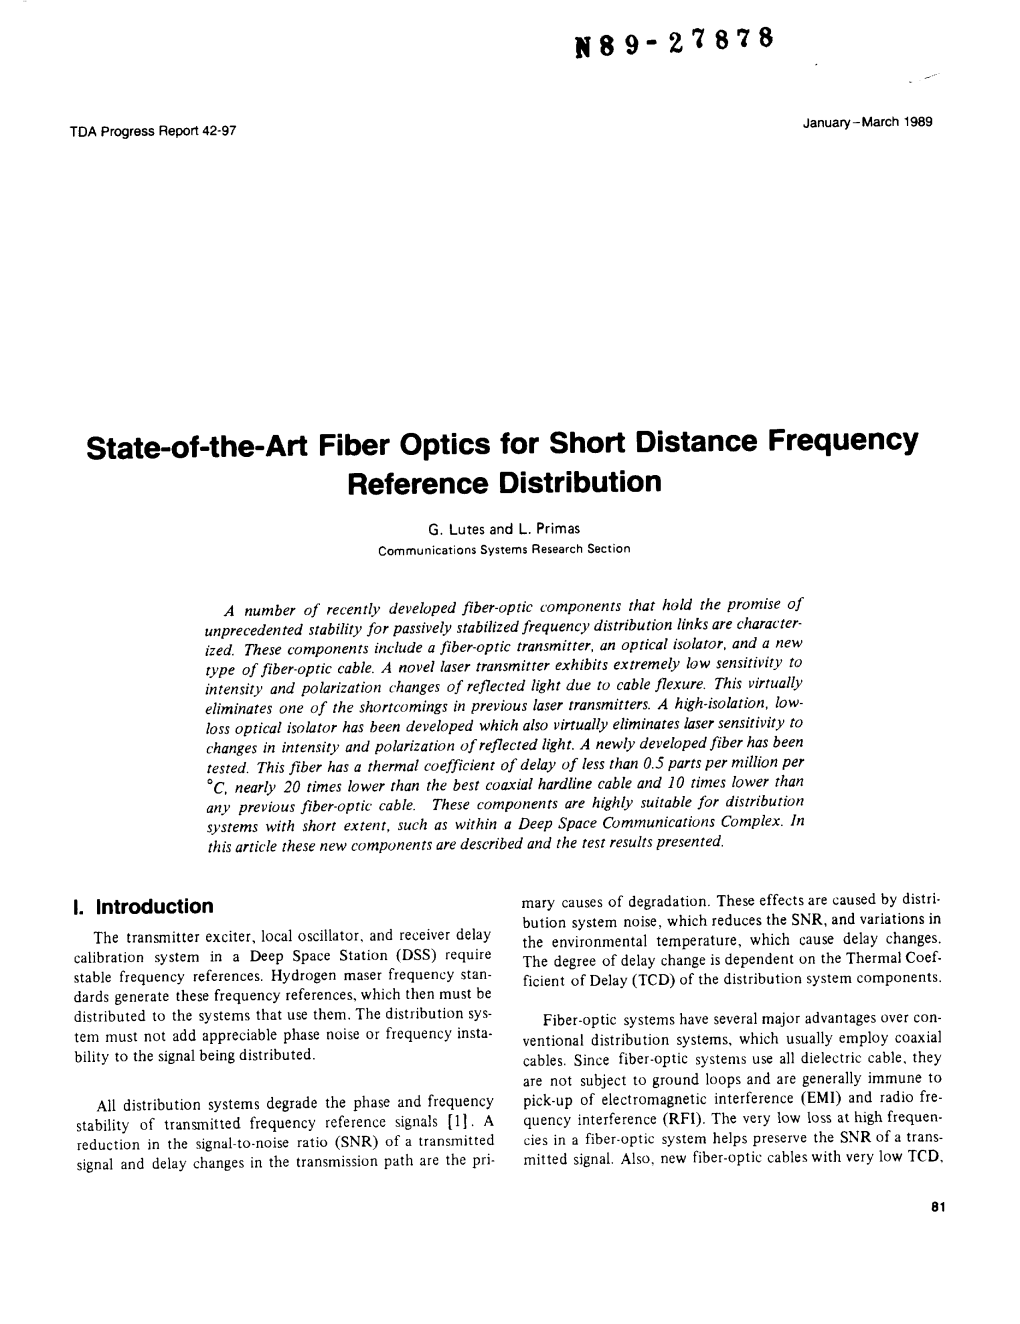 State-Of-The-Art Fiber Optics for Short Distance Frequency Reference Distribution